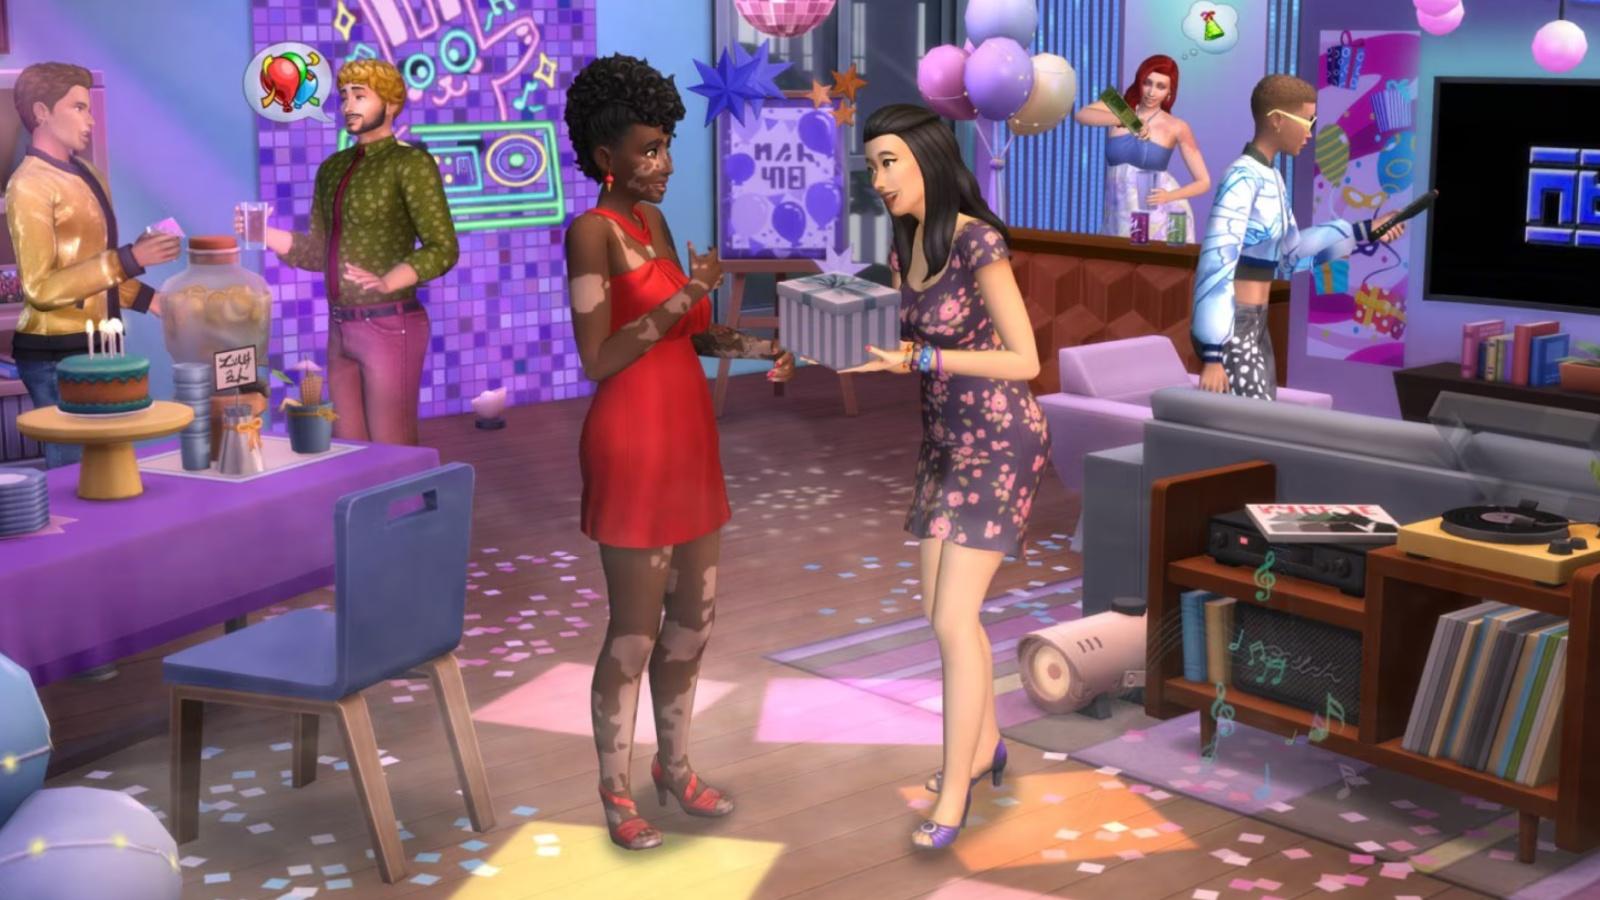 A screenshot featuring the Sims 4 Party Essentials Kit.